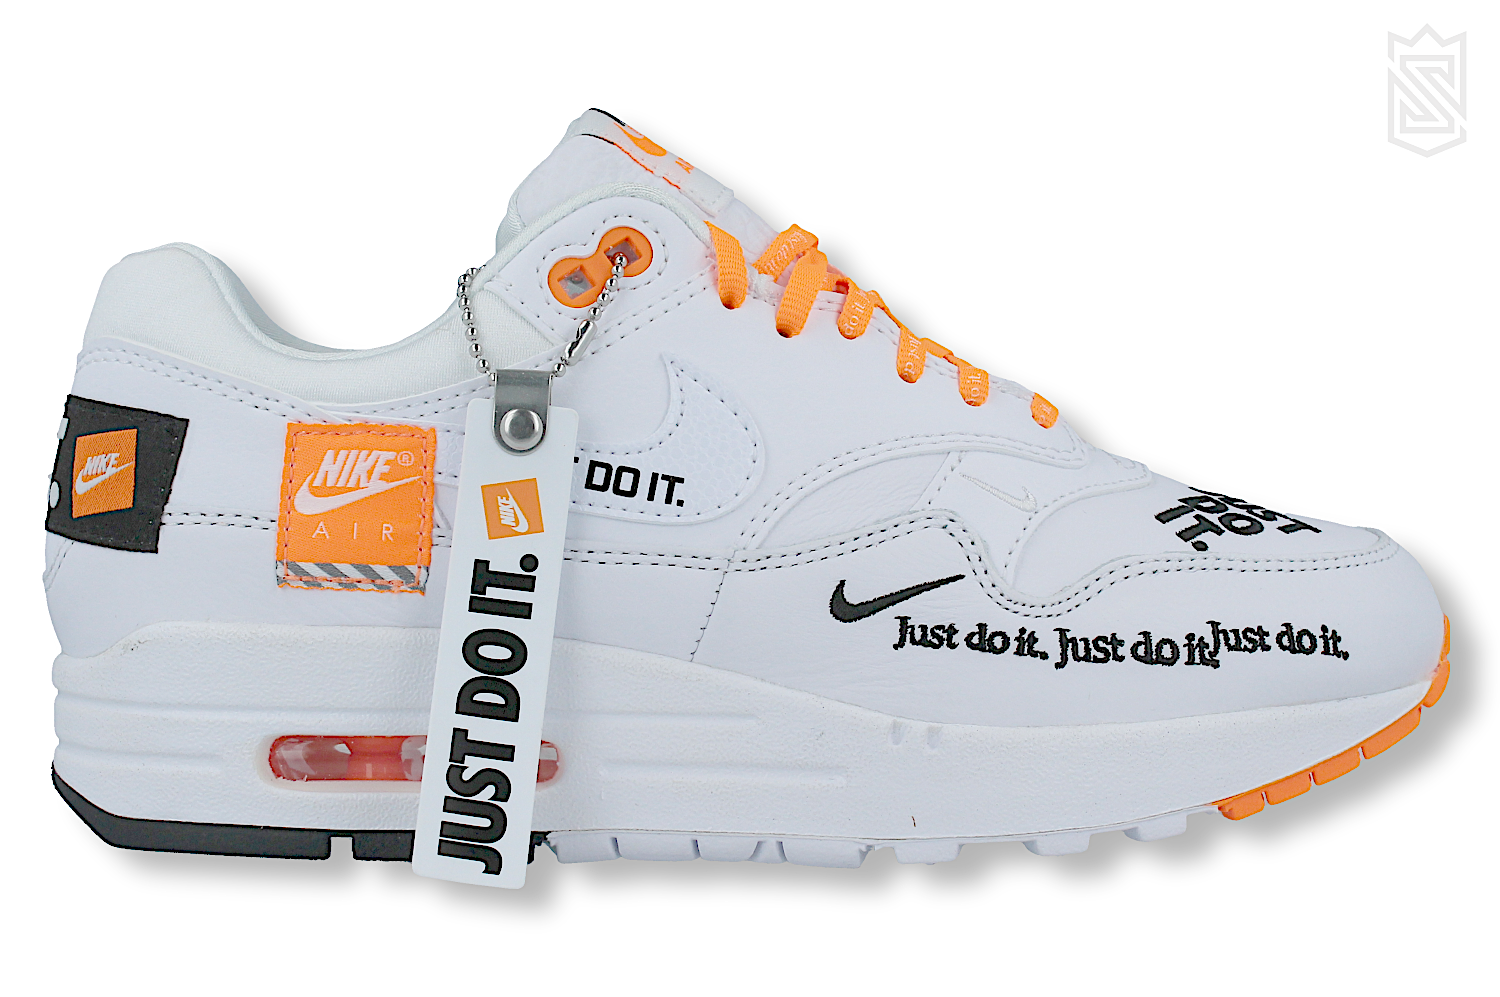 Nike WMNS Air Max 1 - JUST DO IT Pack 